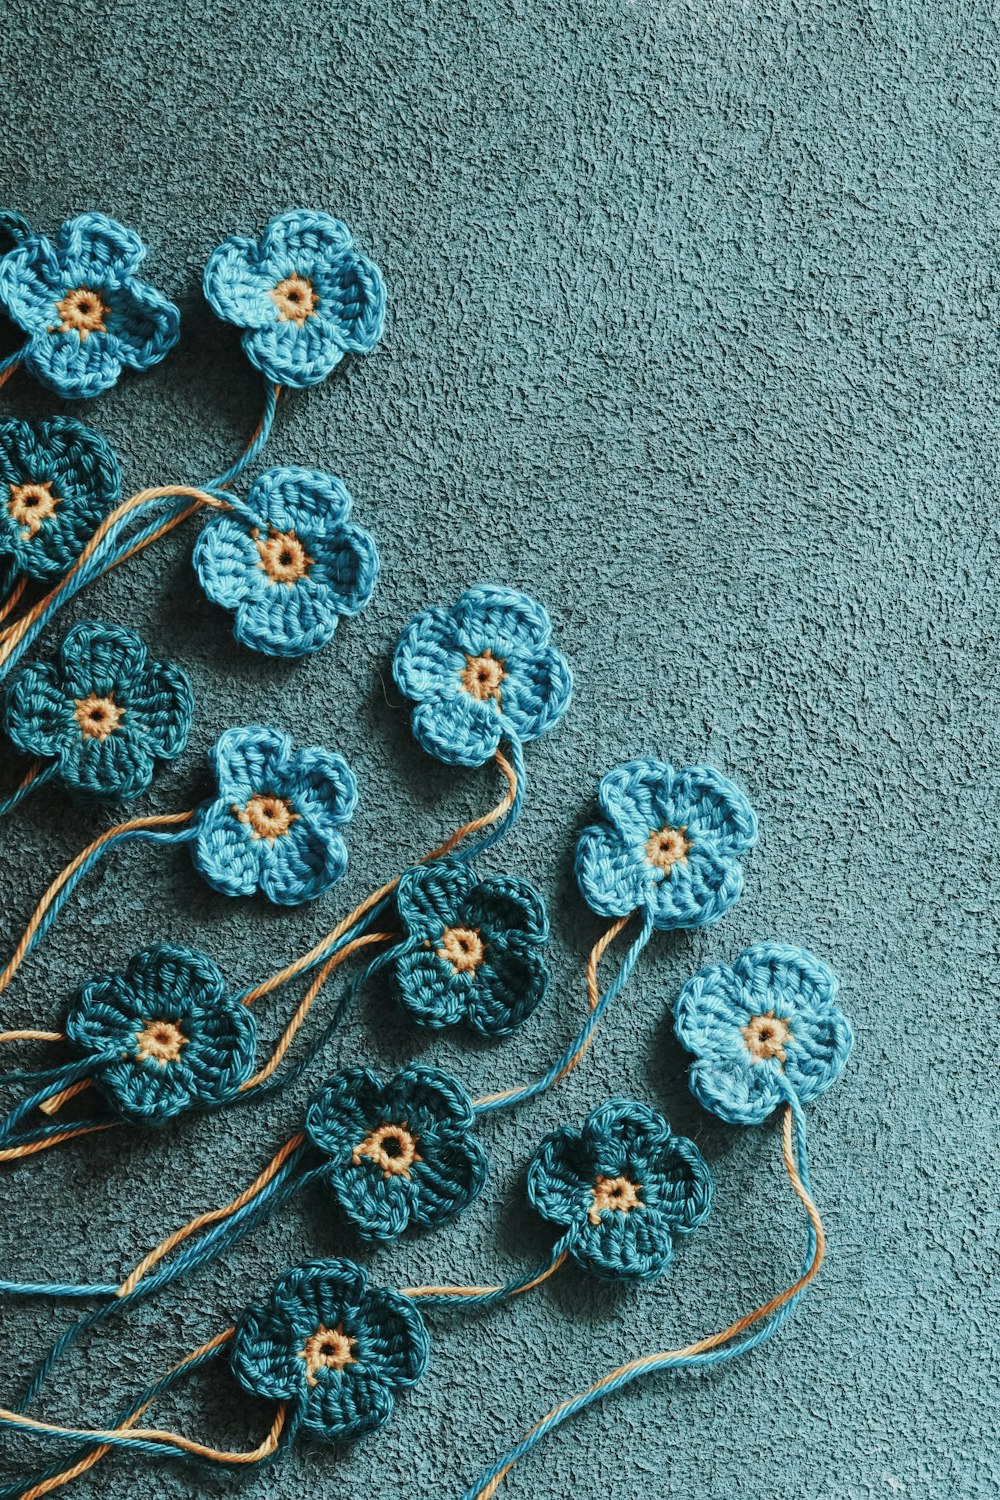 a group of crocheted flowers sitting on a blue surface